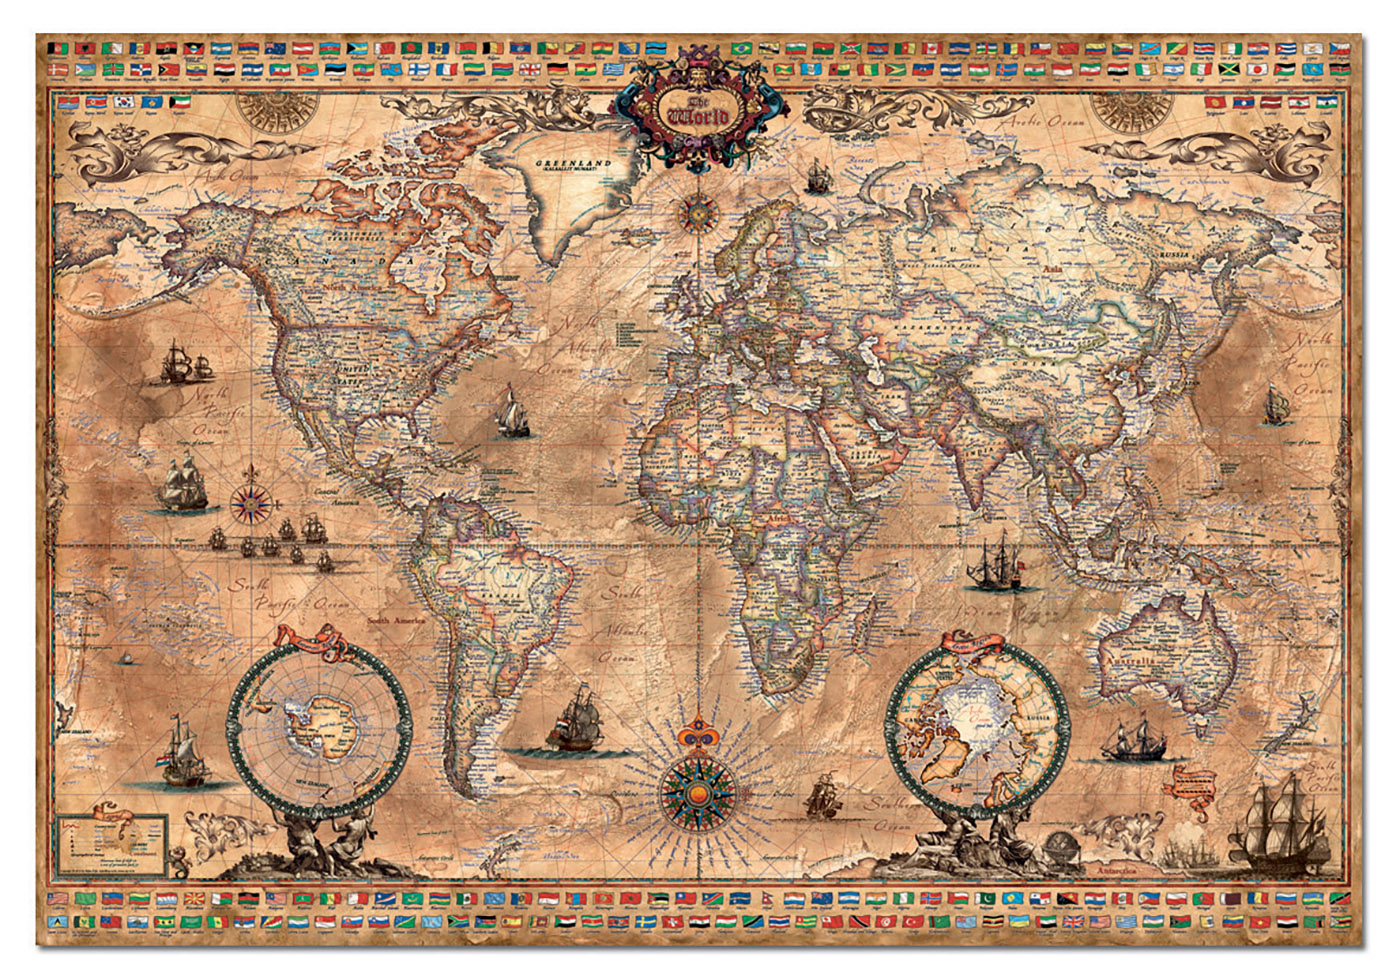 world map puzzle online